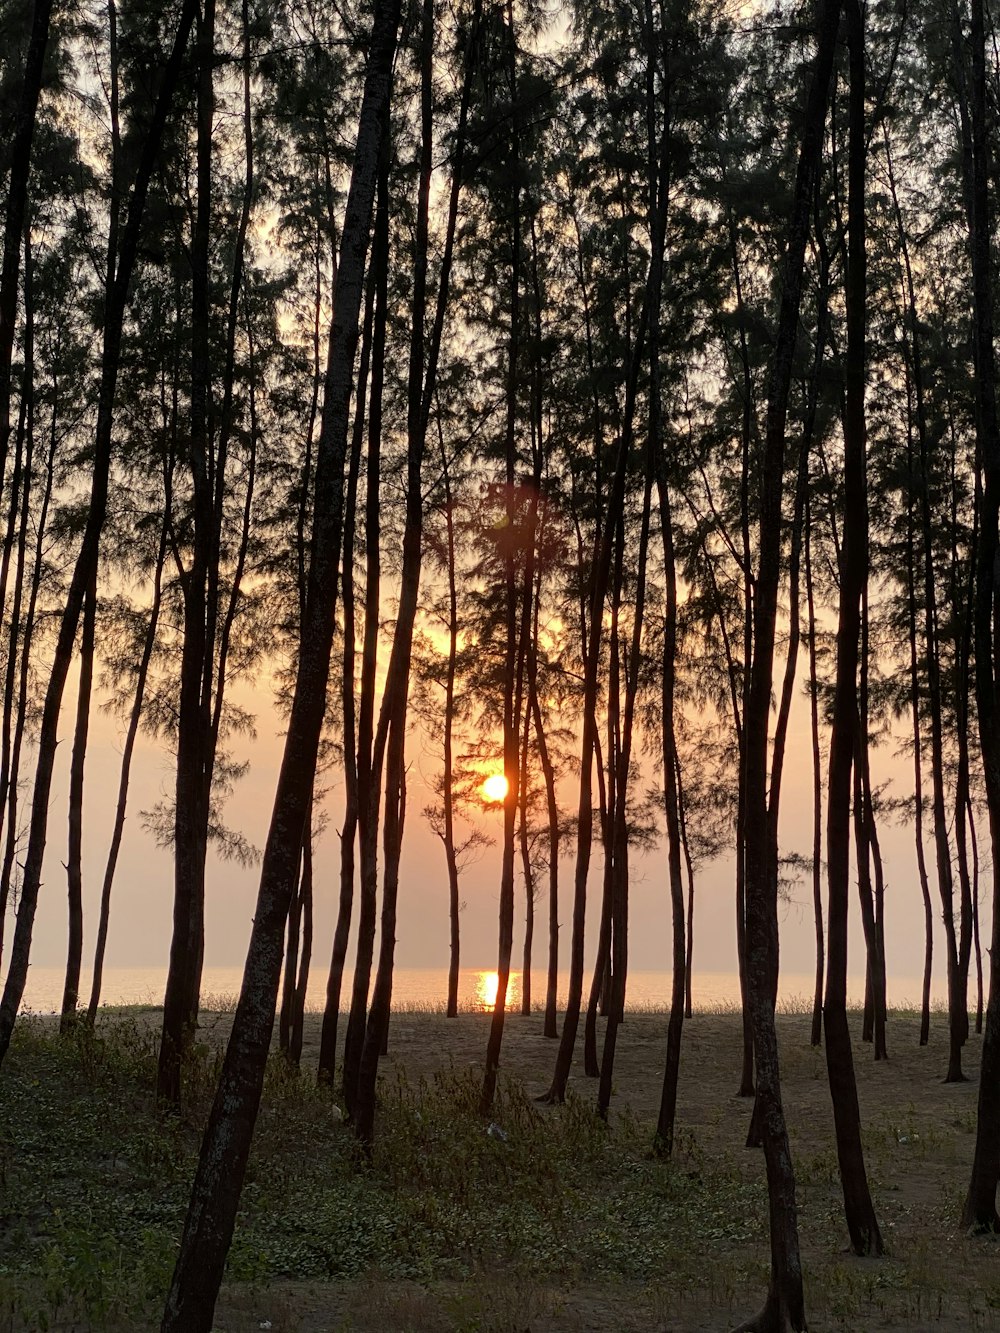 the sun is setting behind the trees in the forest